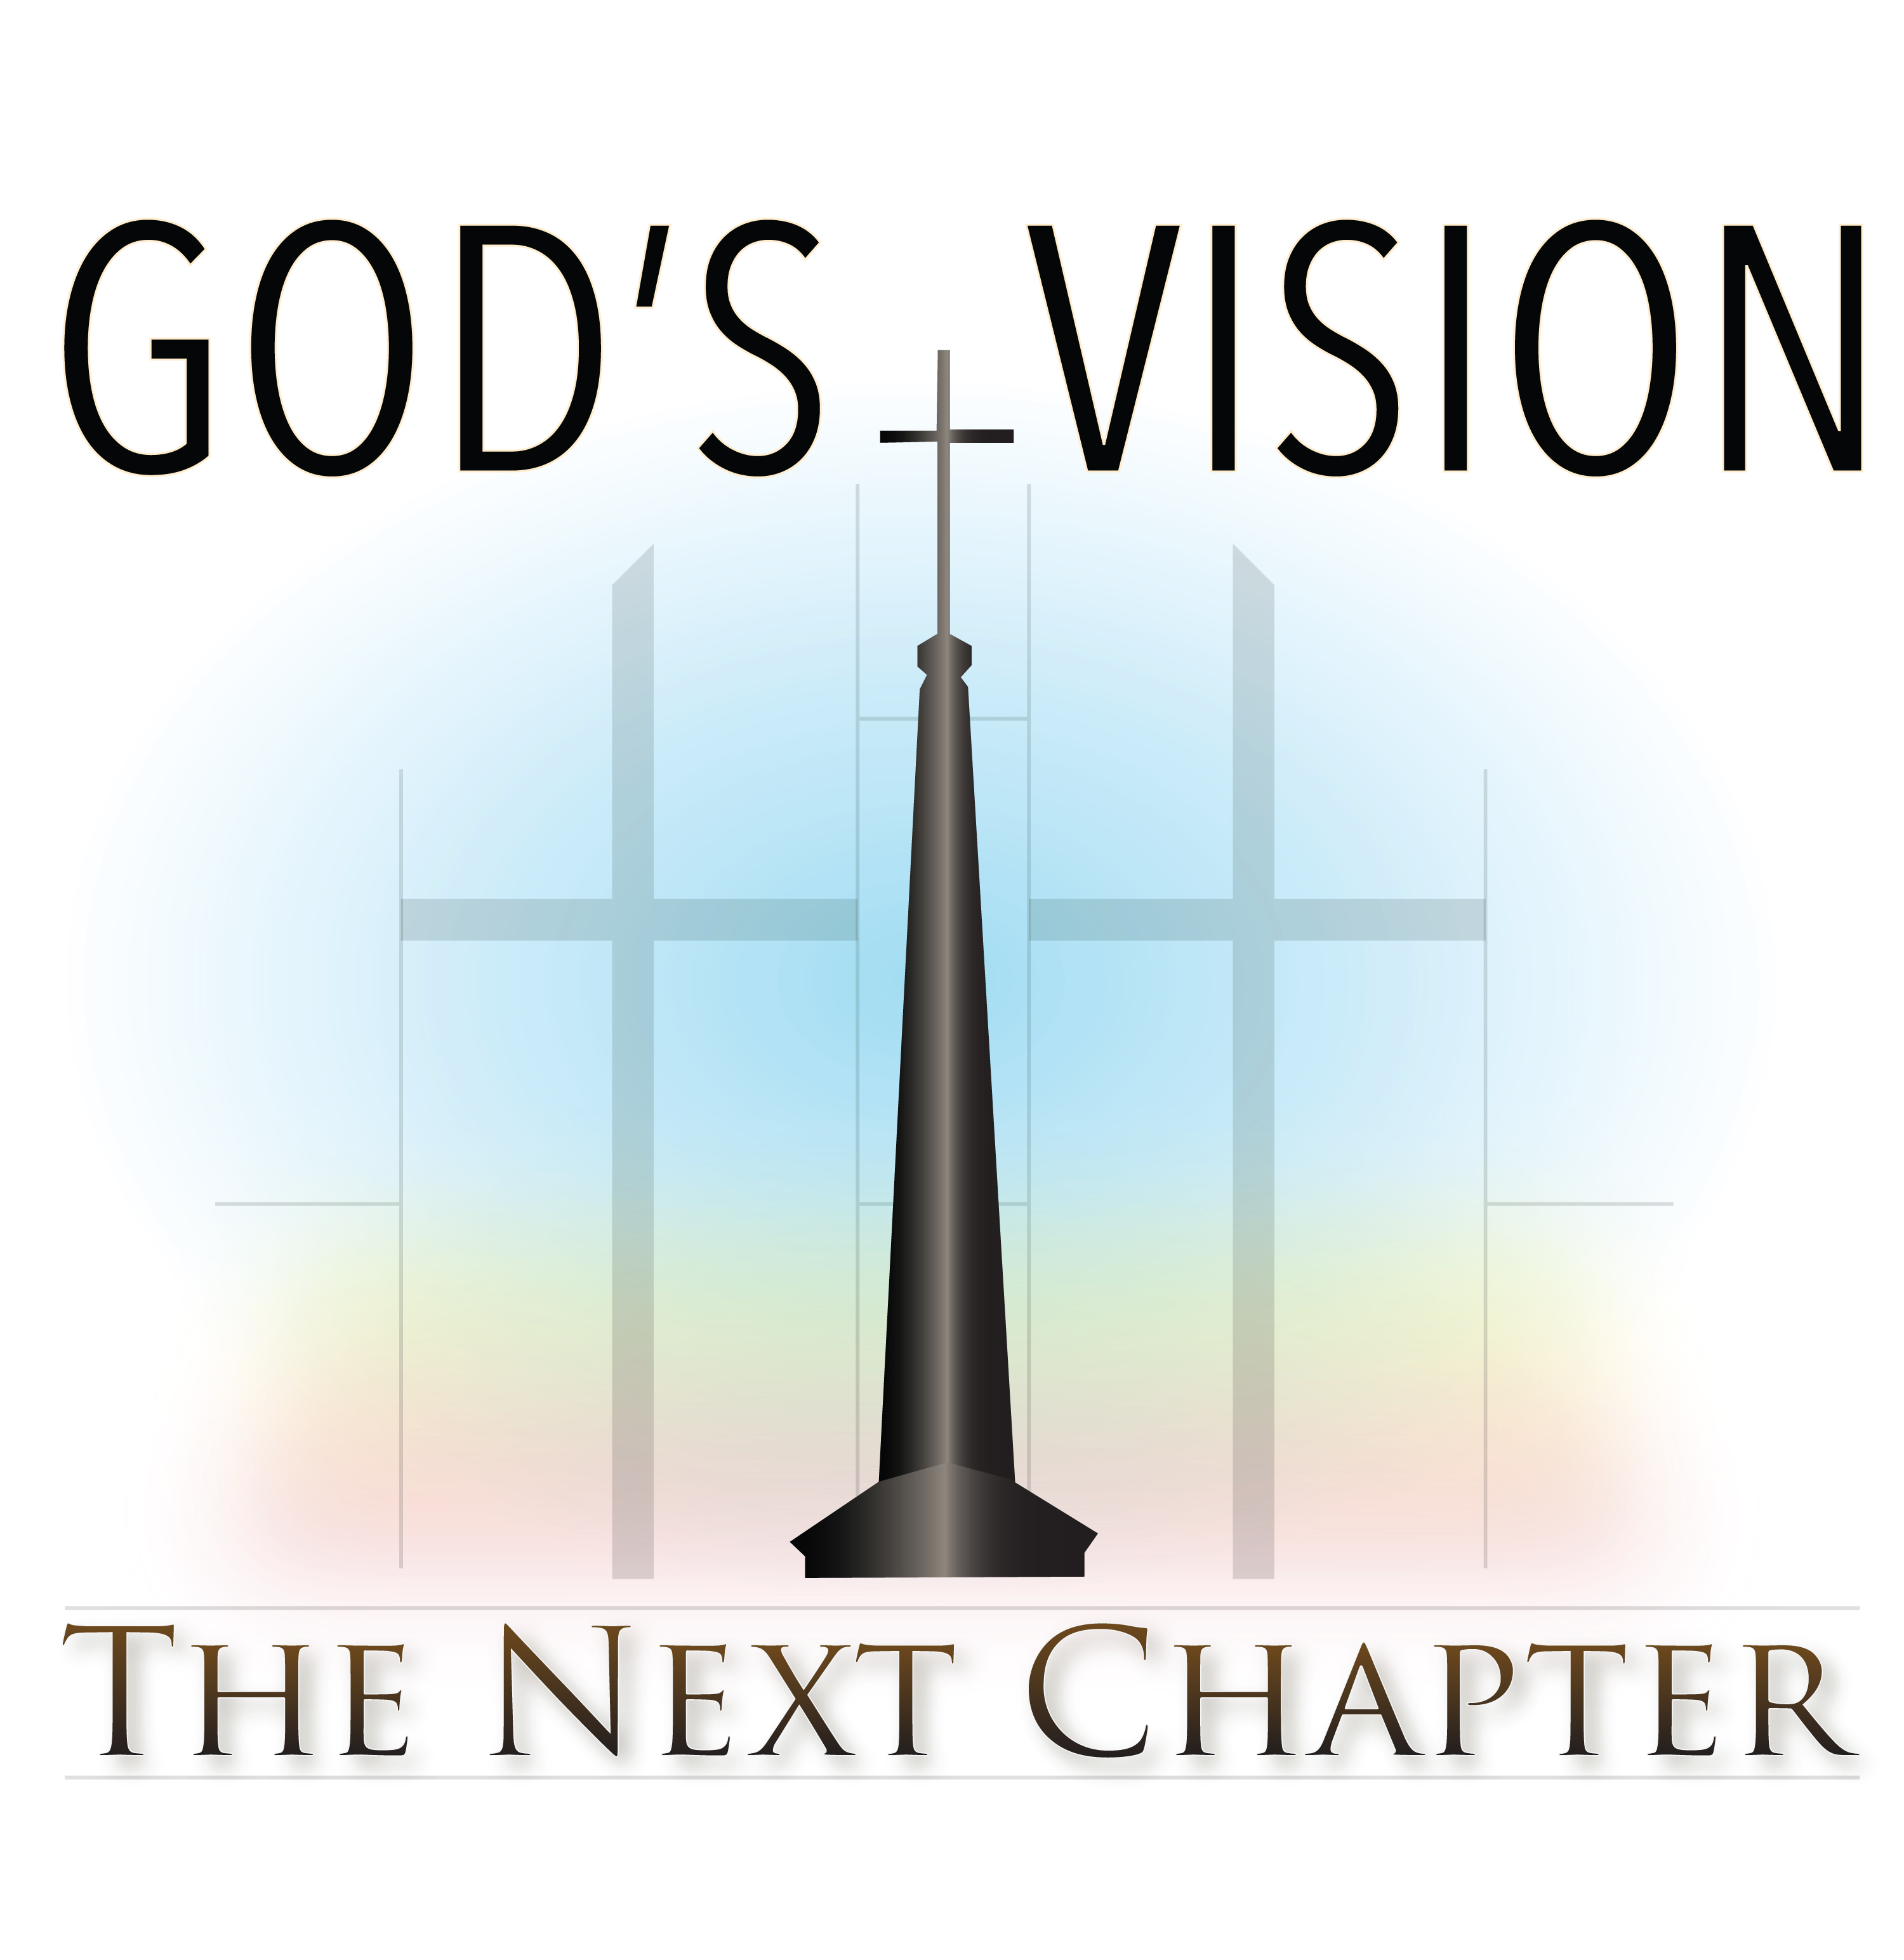 October 30, 2016 - "God's Vision: The Next Chapter" - Part I